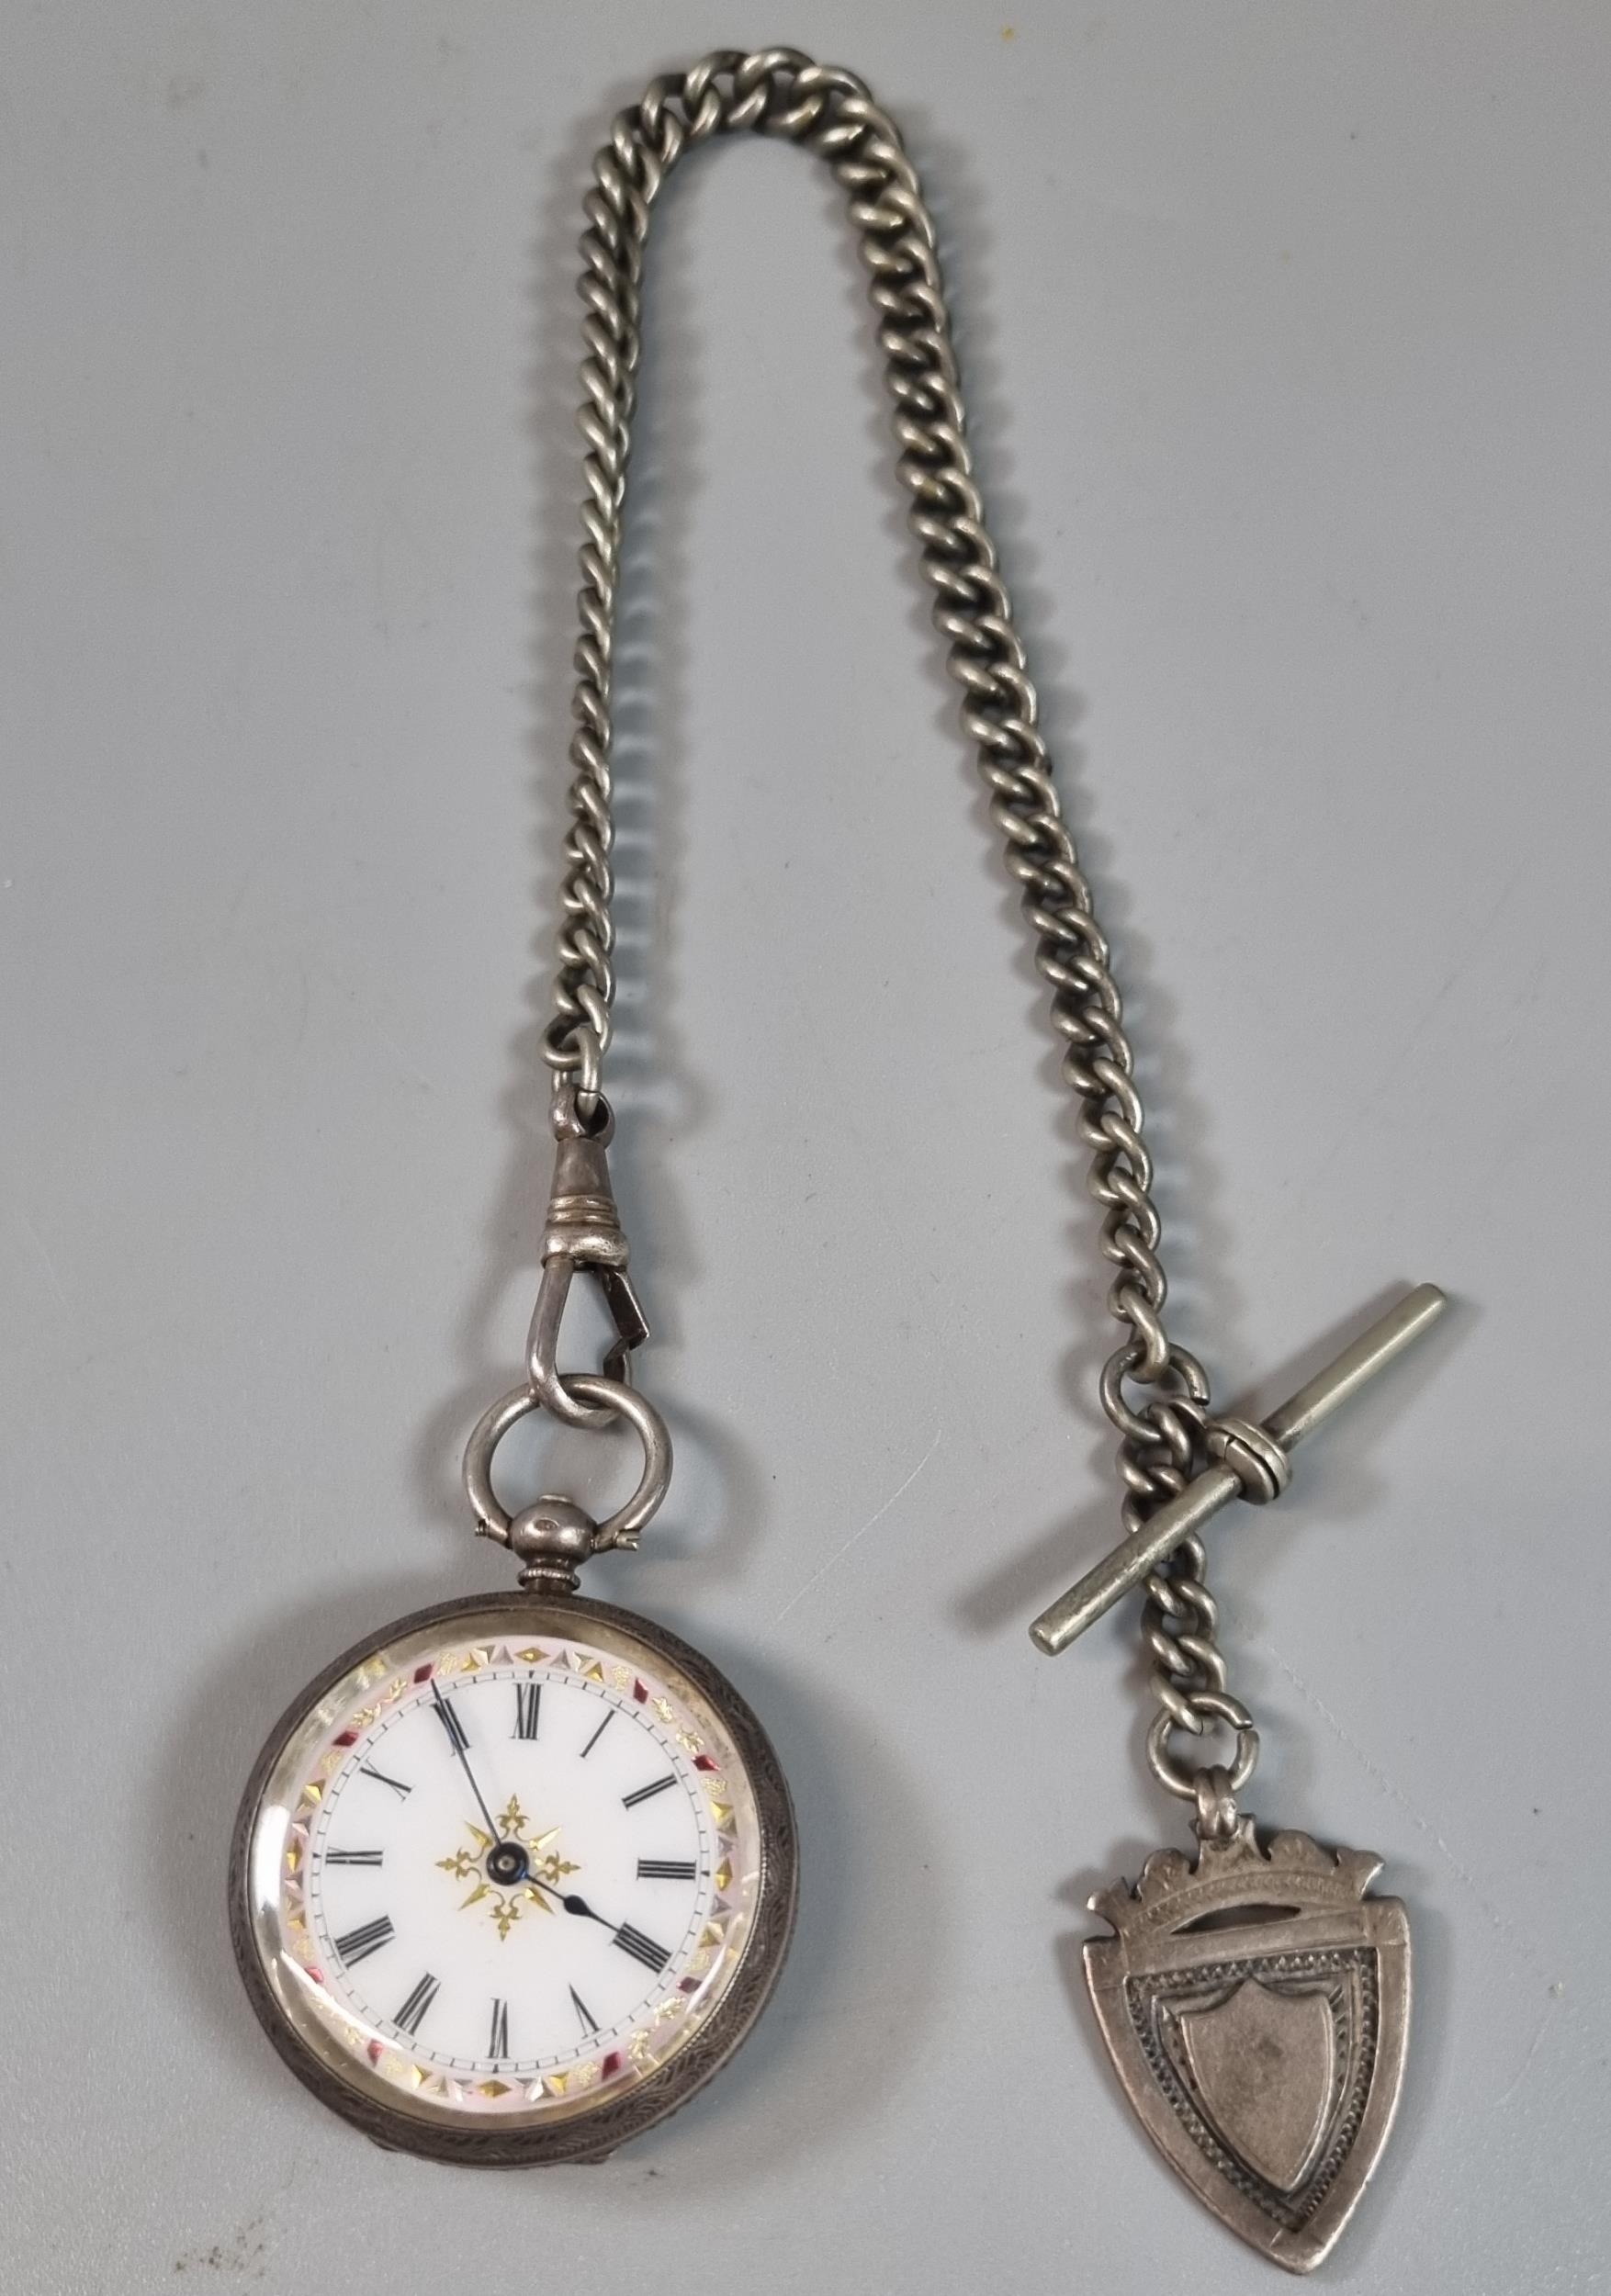 Silver and enamel ladies fancy fob watch with silver curb link Albert chain T bar and shield - Image 2 of 3